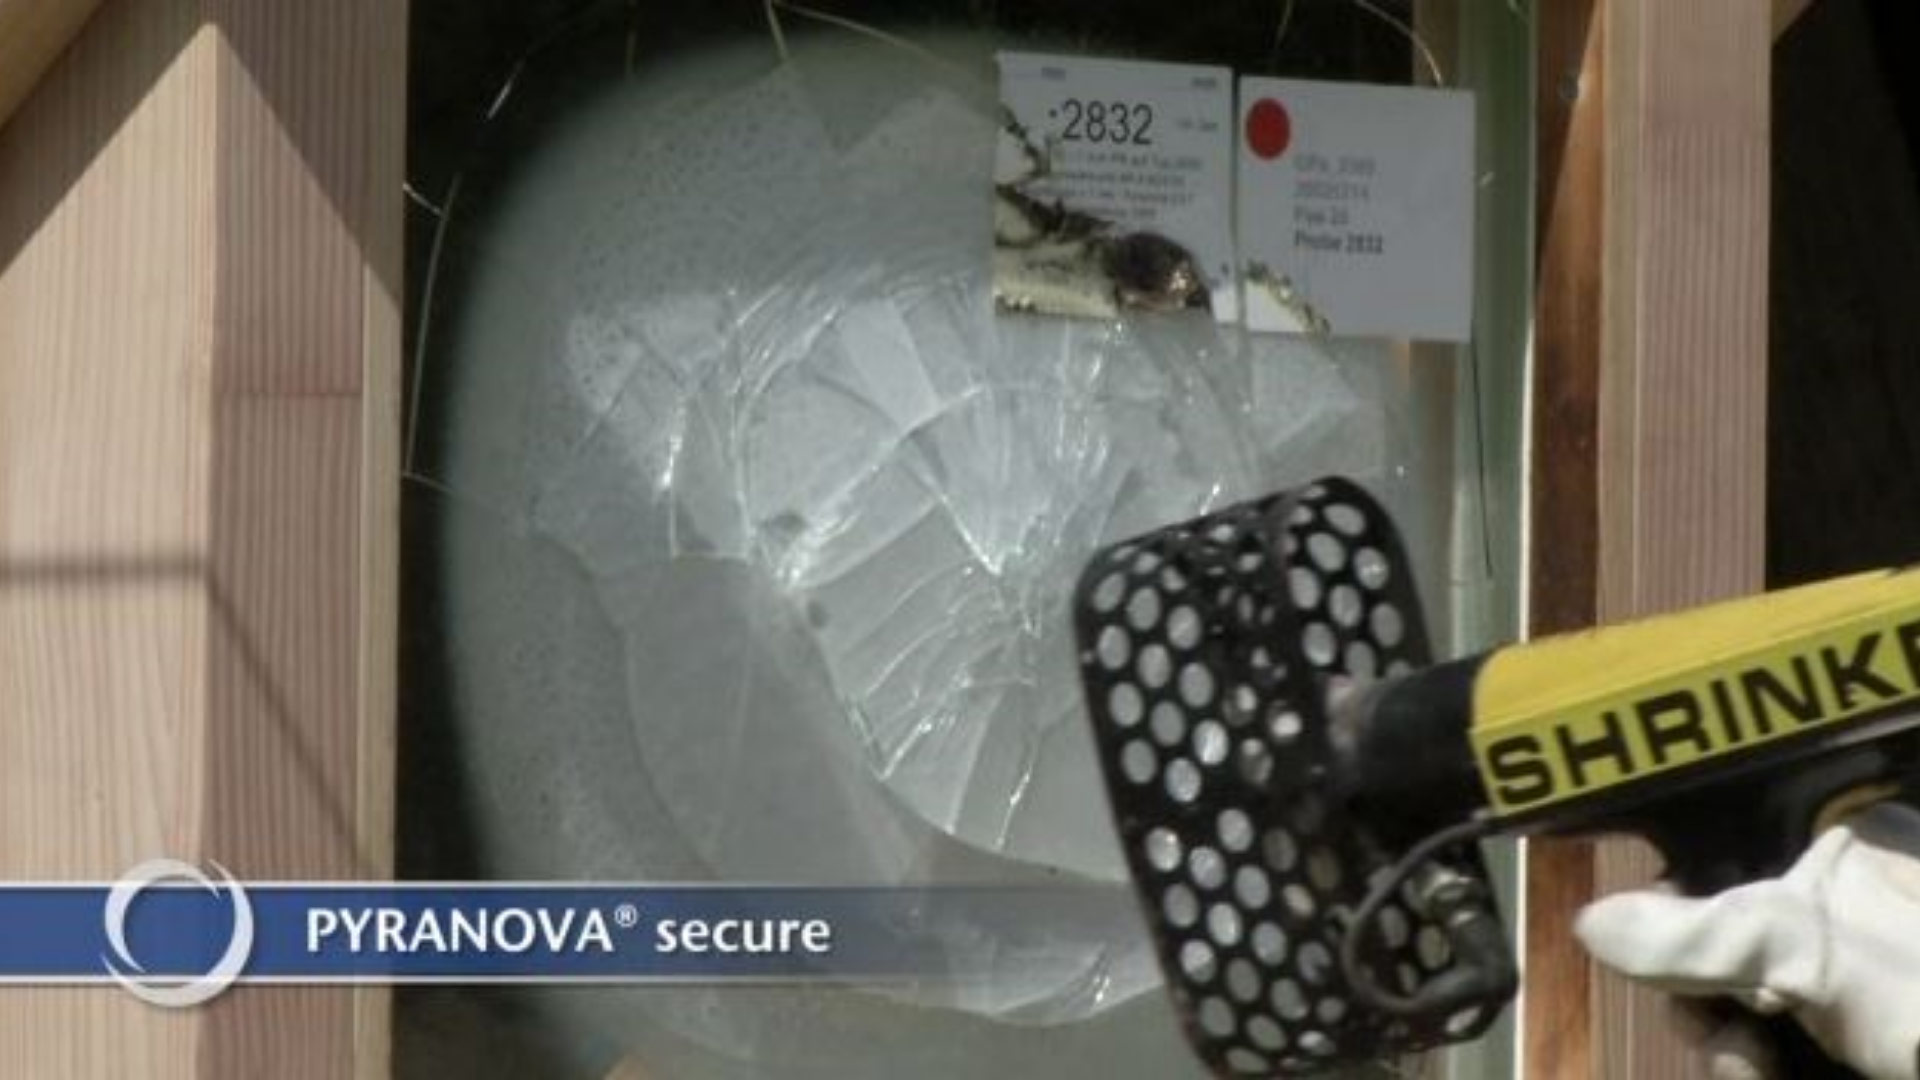 Video showing how a sample of PYRANOVA® secure handles heat, fire and bullets